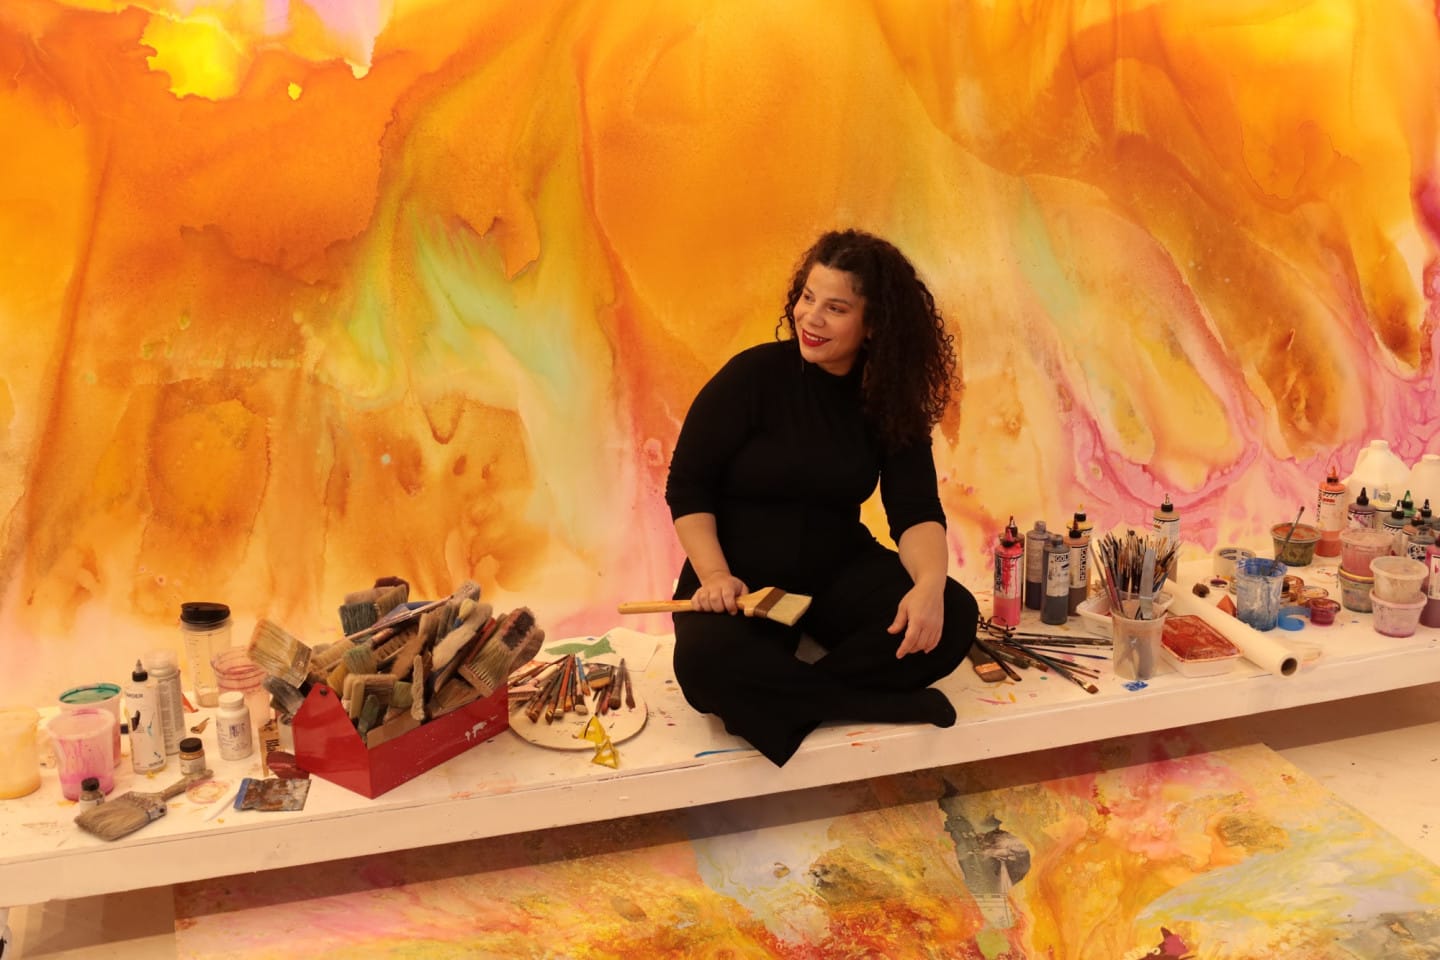 Artist Firelei Baez sits in a studio amongst paints, in front of a bright yellow painting